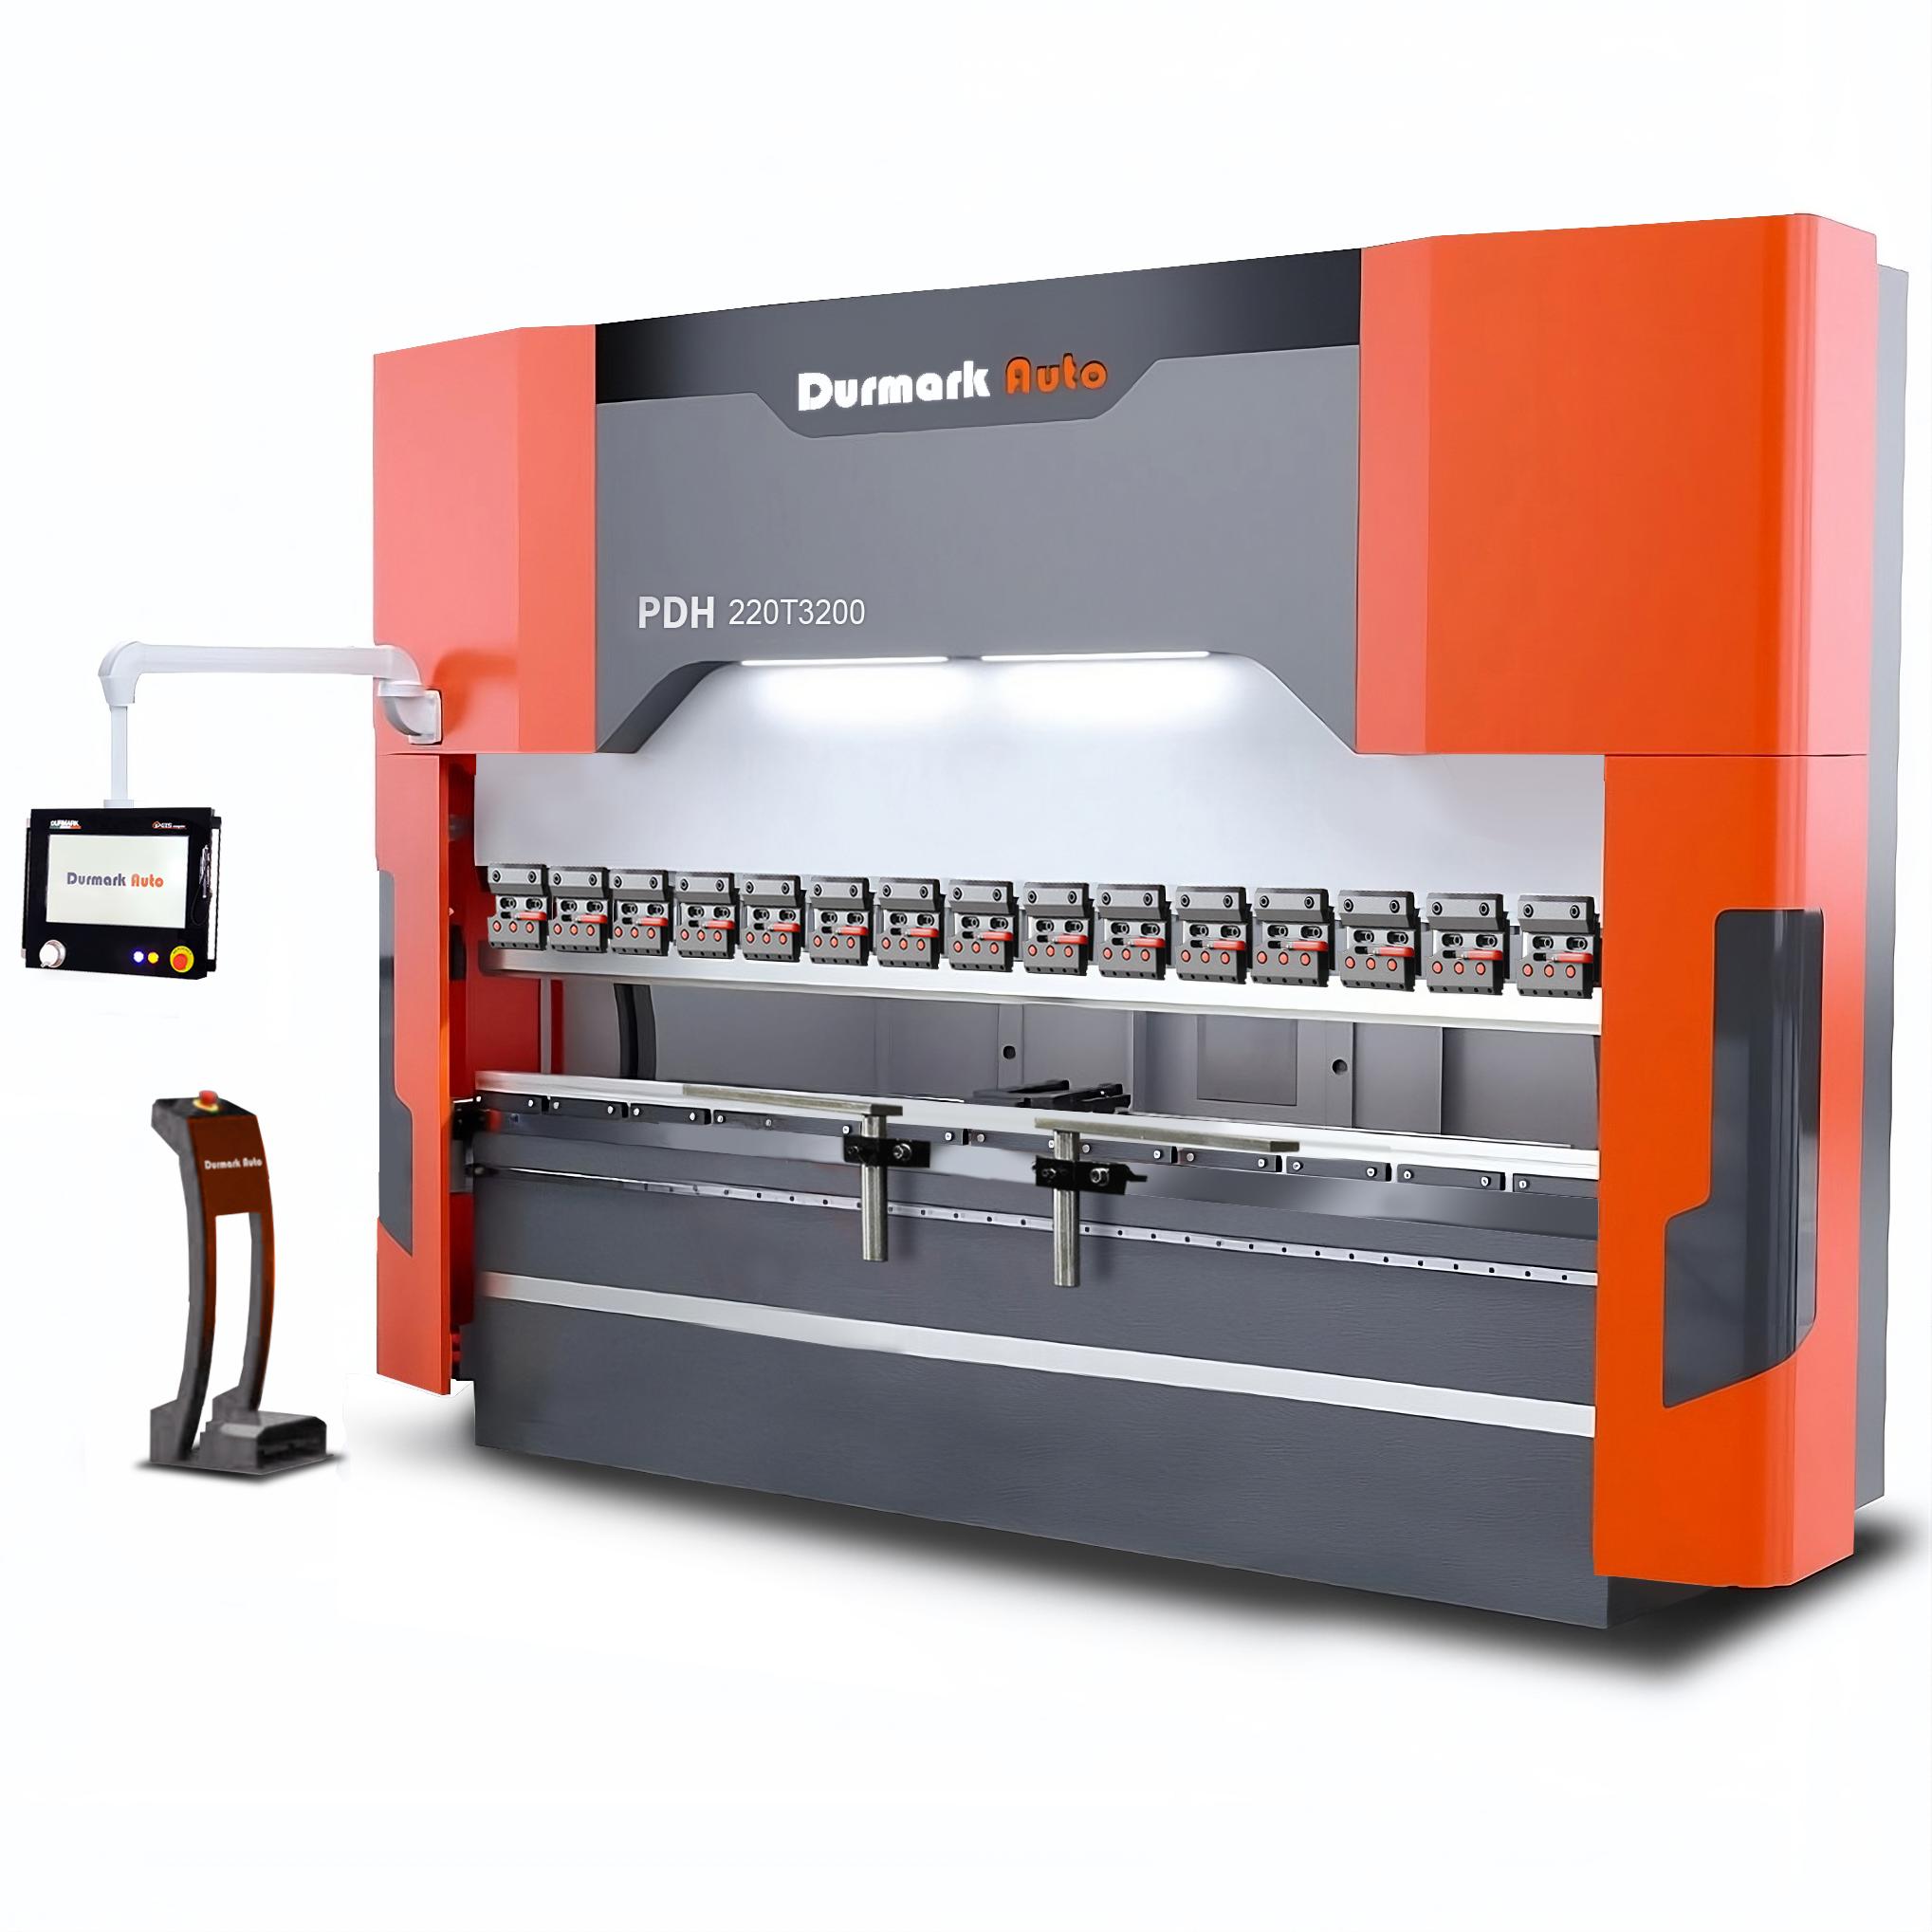 The faster running press is manufactured by Durmark PDH- 170T4000 bending machine